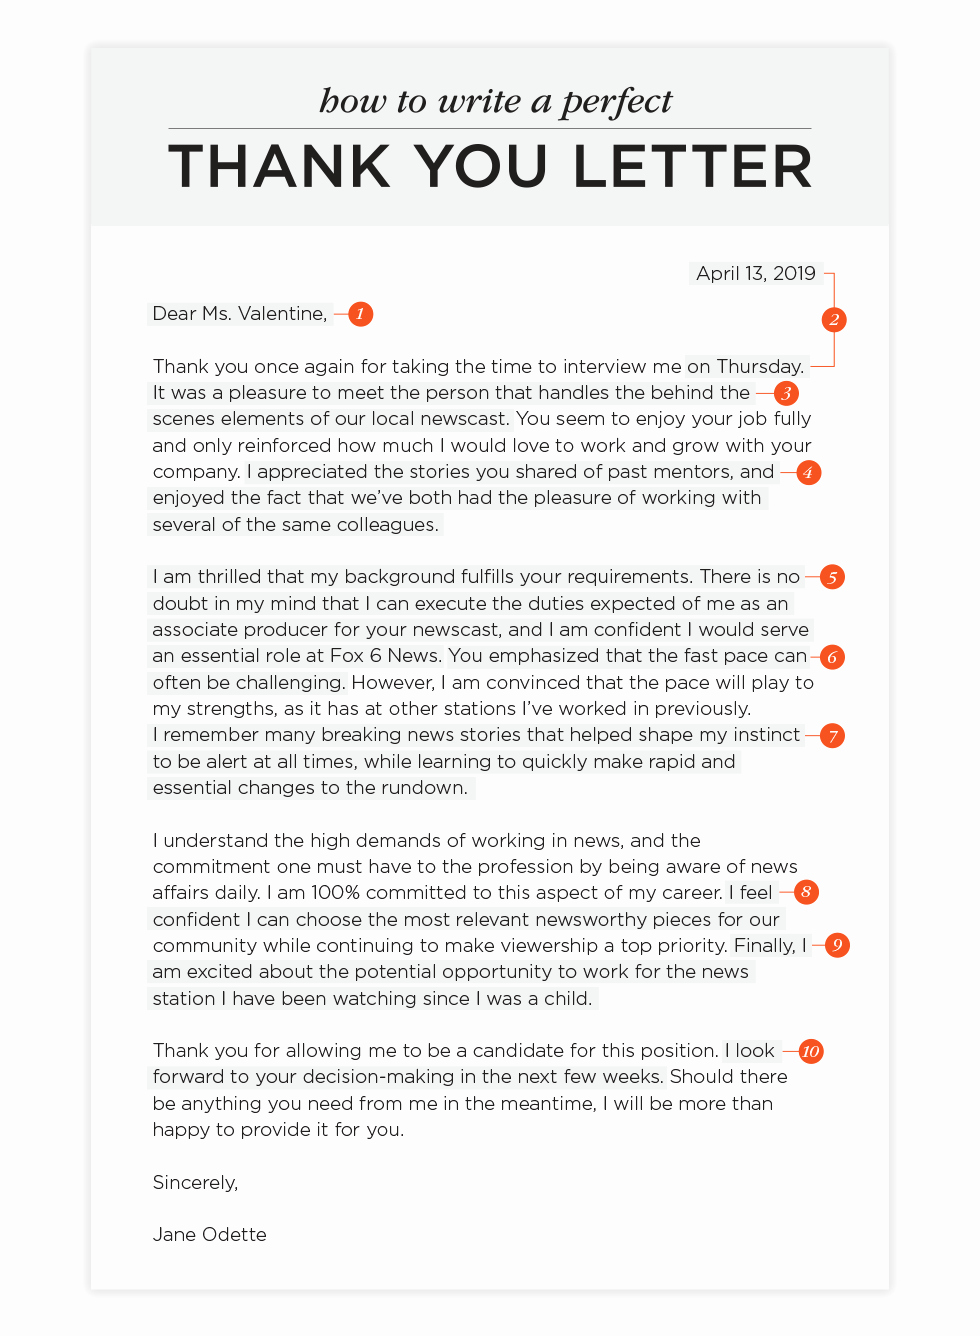 Thank You Letter Business Elegant How to Write A Thank You Letter and Templates